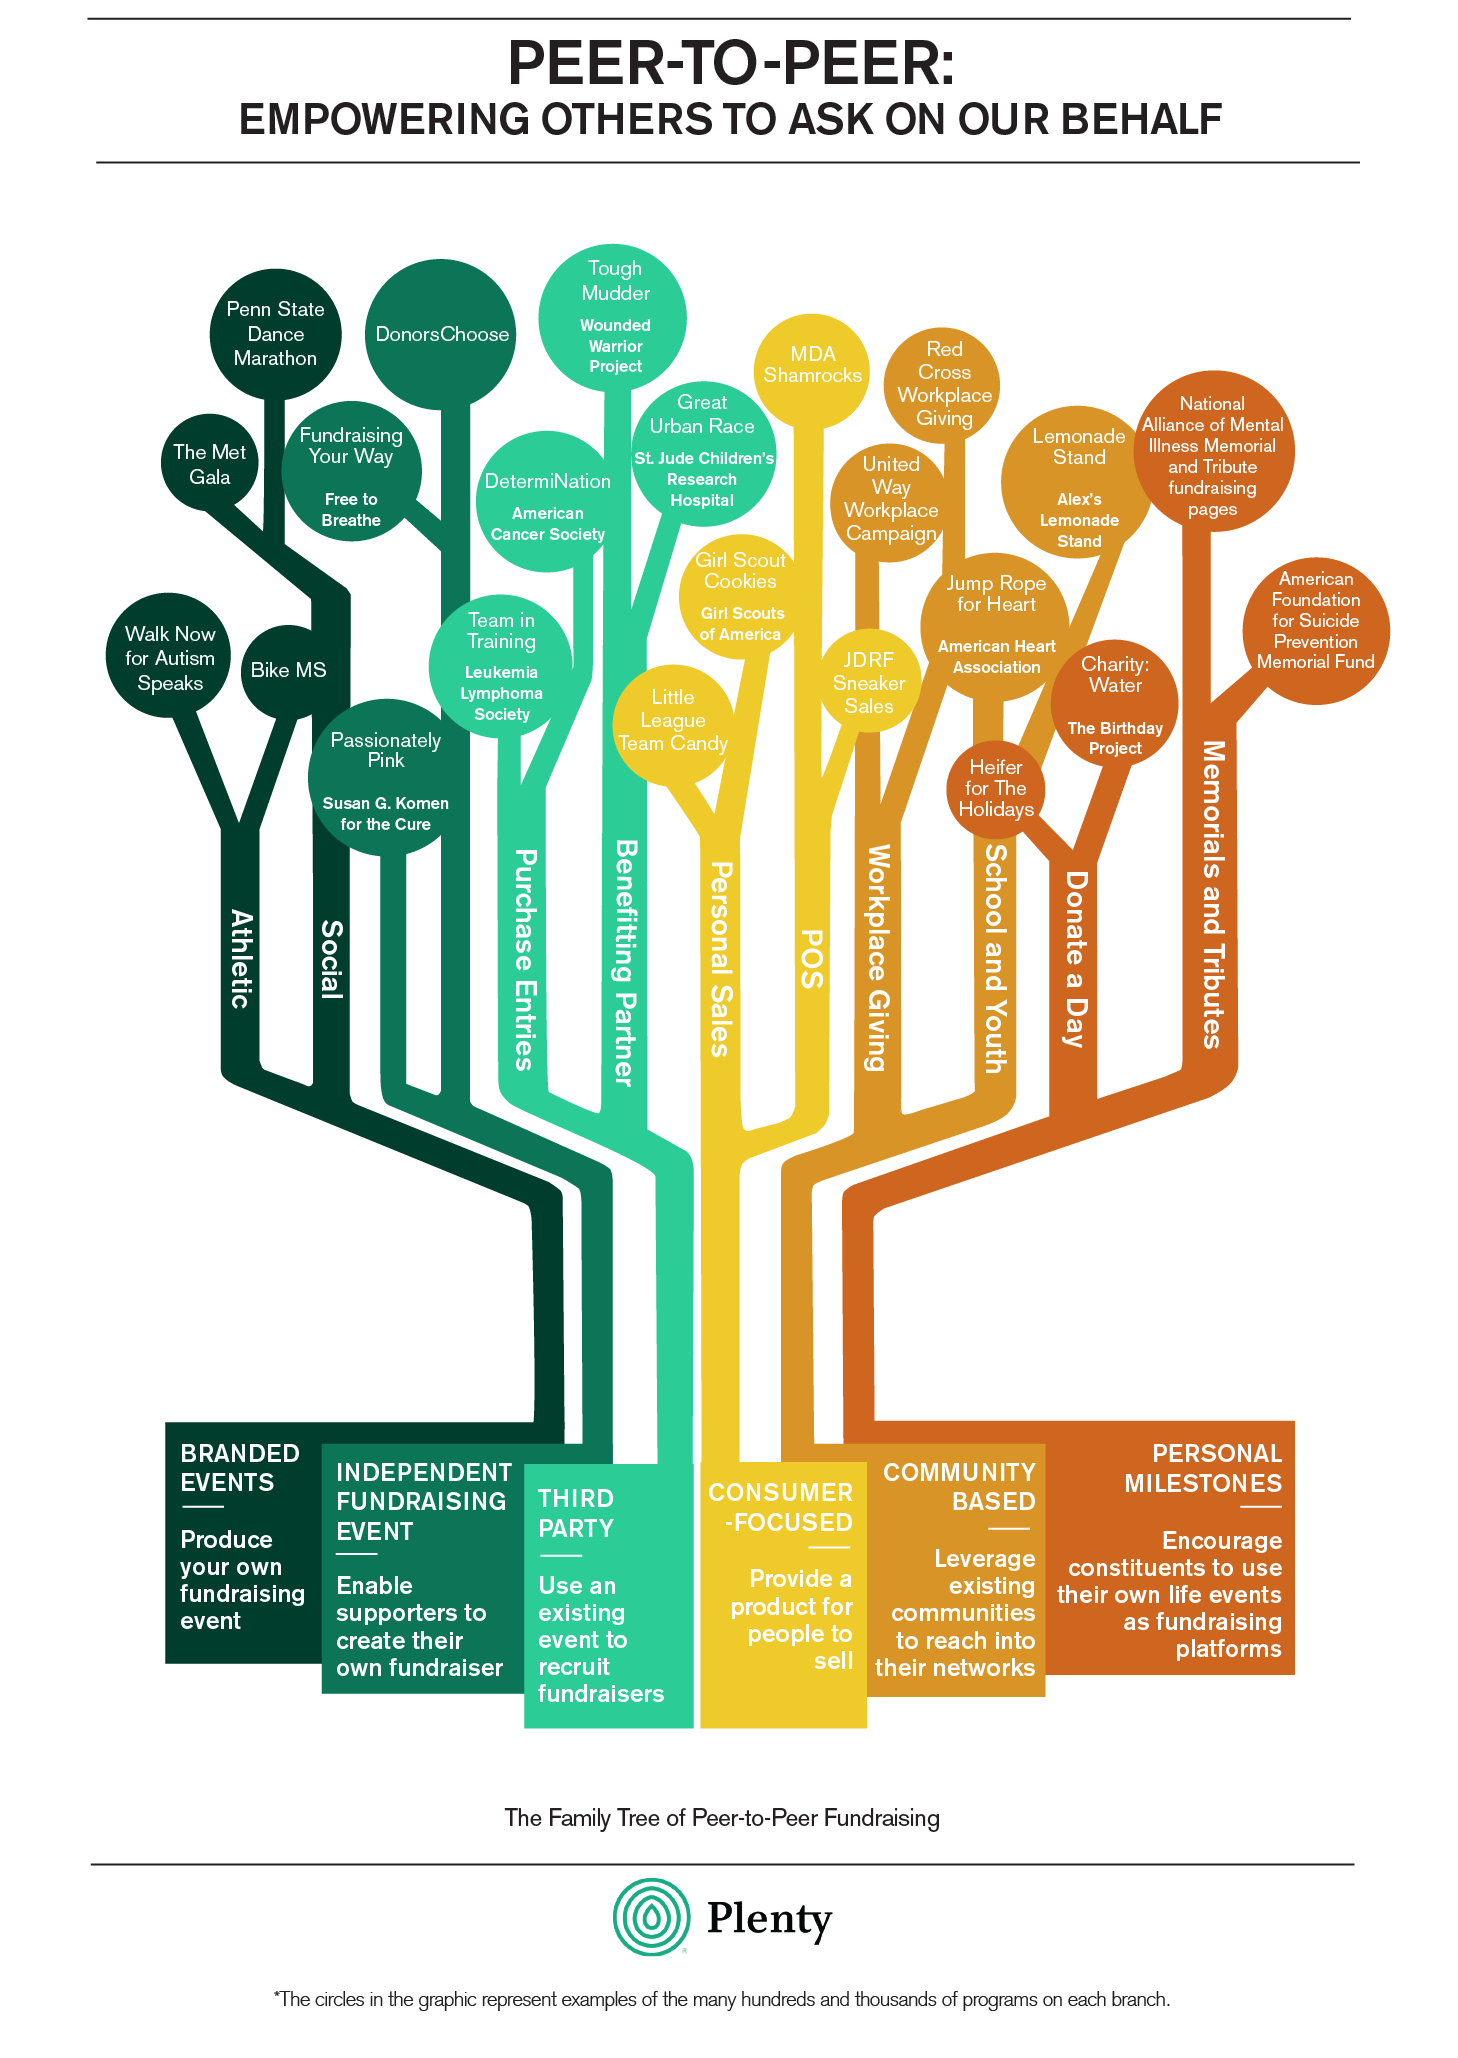 The Peer to Peer Family Tree shows a number of examples to explain what peer to peer fundraising is and how it works.